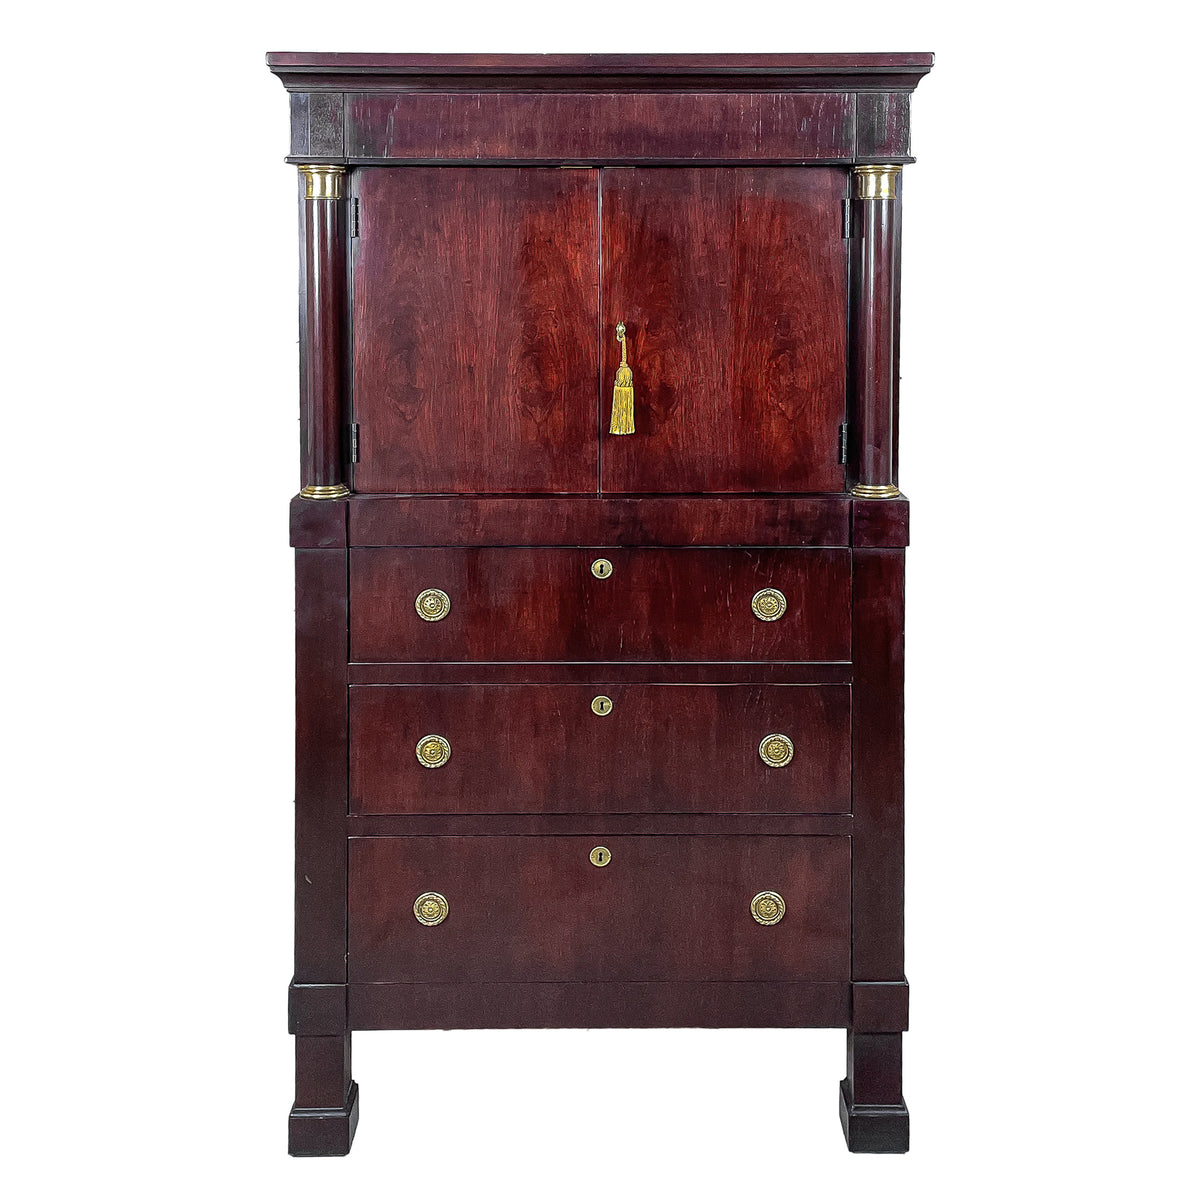 Ralph Lauren Mahogany Chest Of Drawers 6-Drawer Dresser With Claw